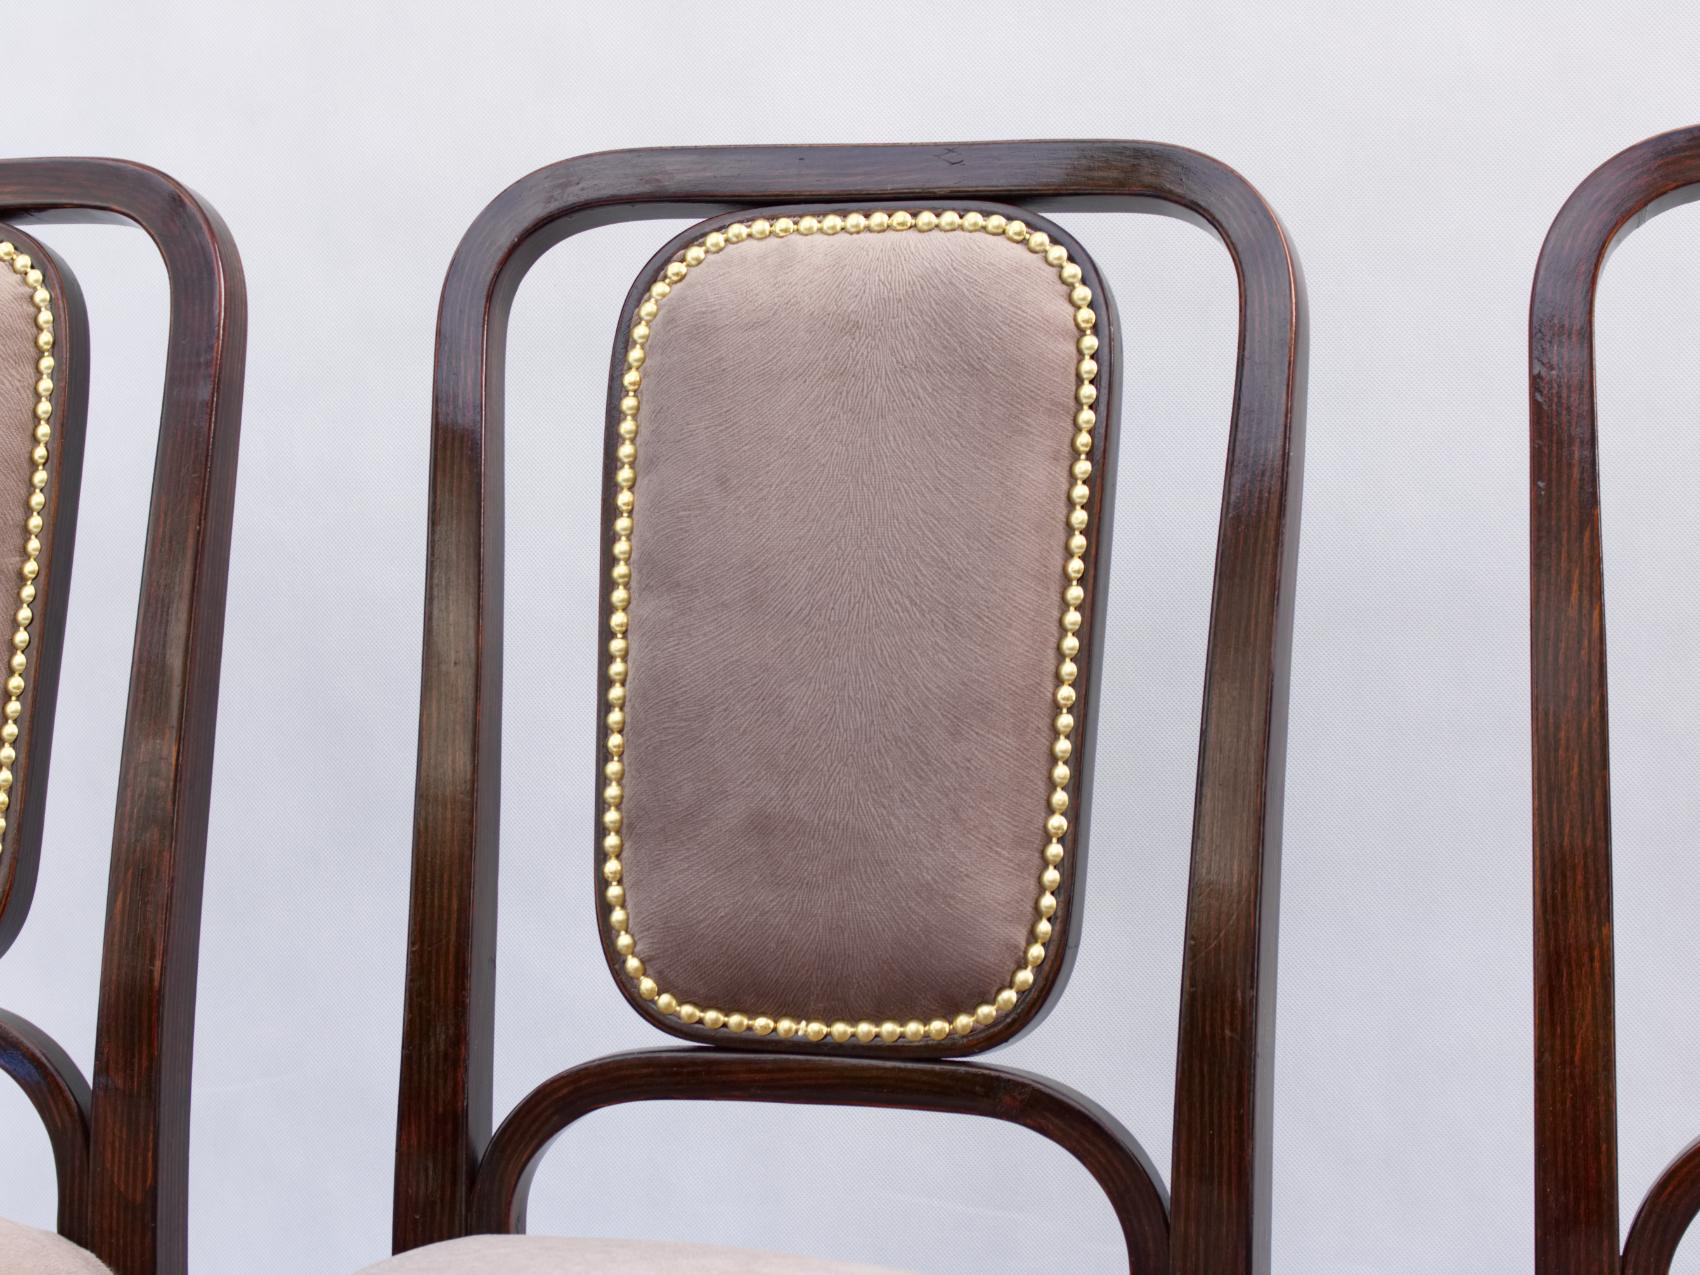 Reupholstered chairs by Thonet, early 20th century, circa 1905.
Marked Thonet Wien.